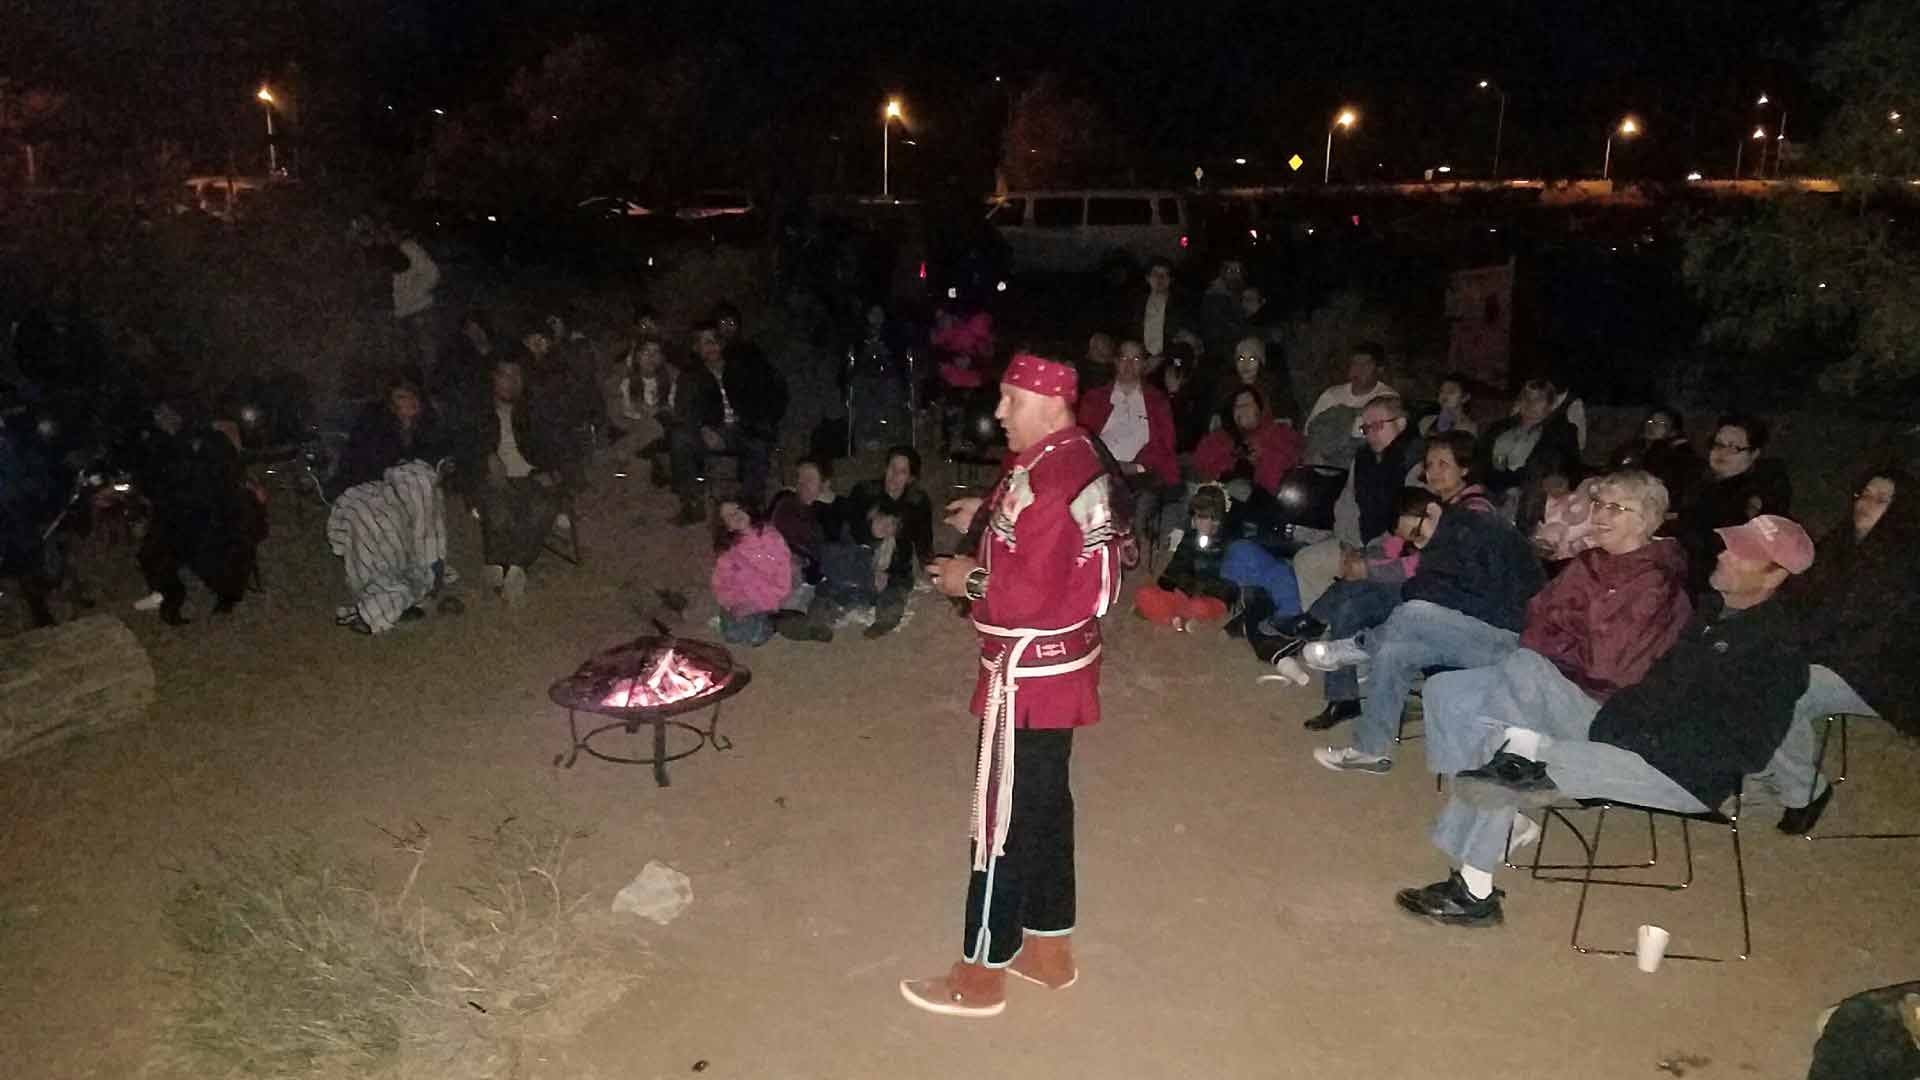 Alex Mares stands in front of a fire pit surrounded by people seeted in camping chairs with coats and blankets